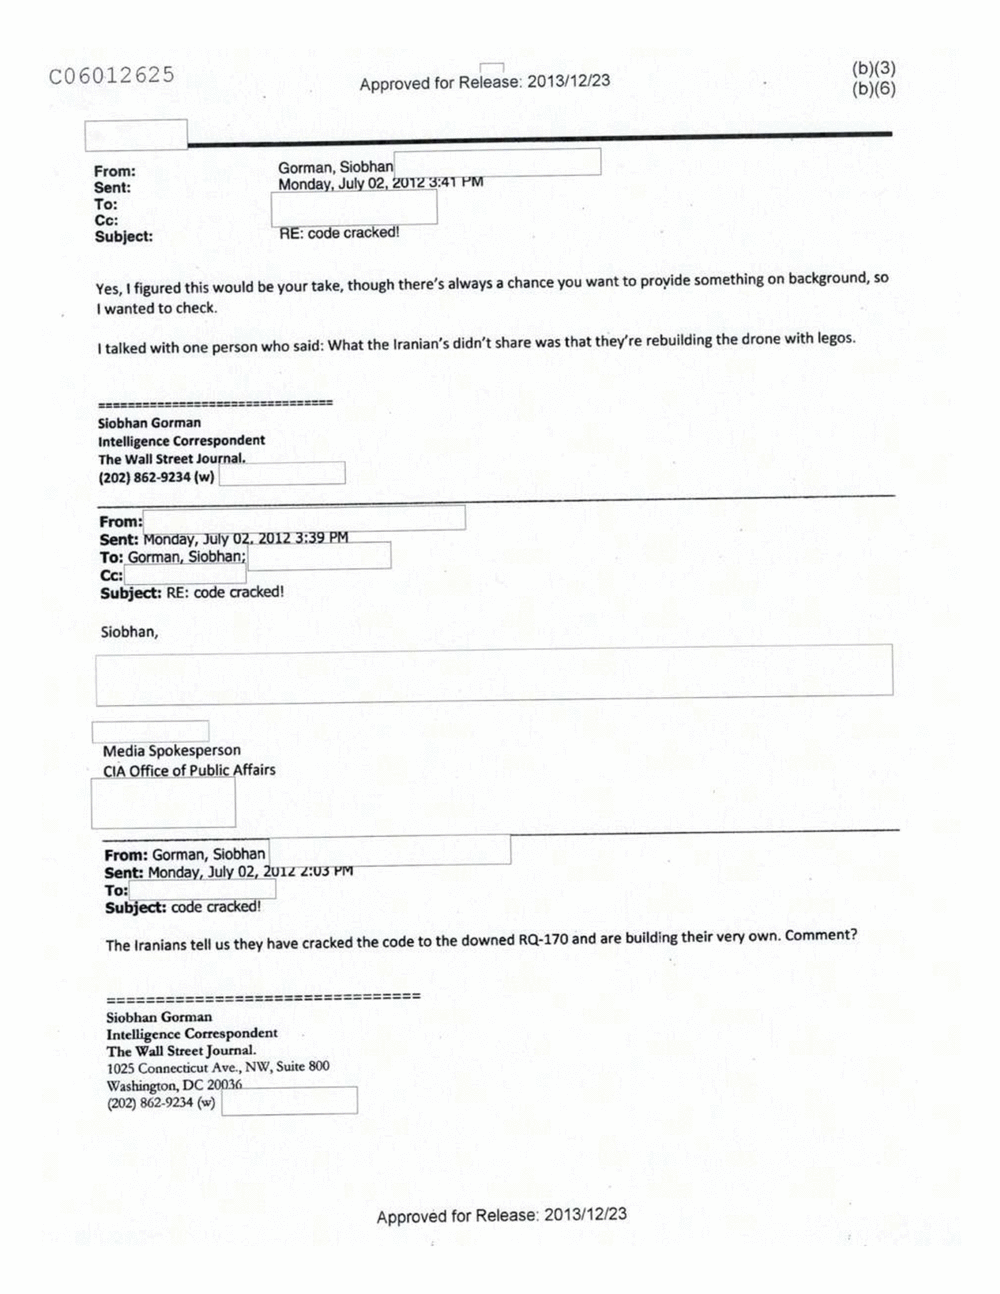 Page 180 from Email Correspondence Between Reporters and CIA Flacks